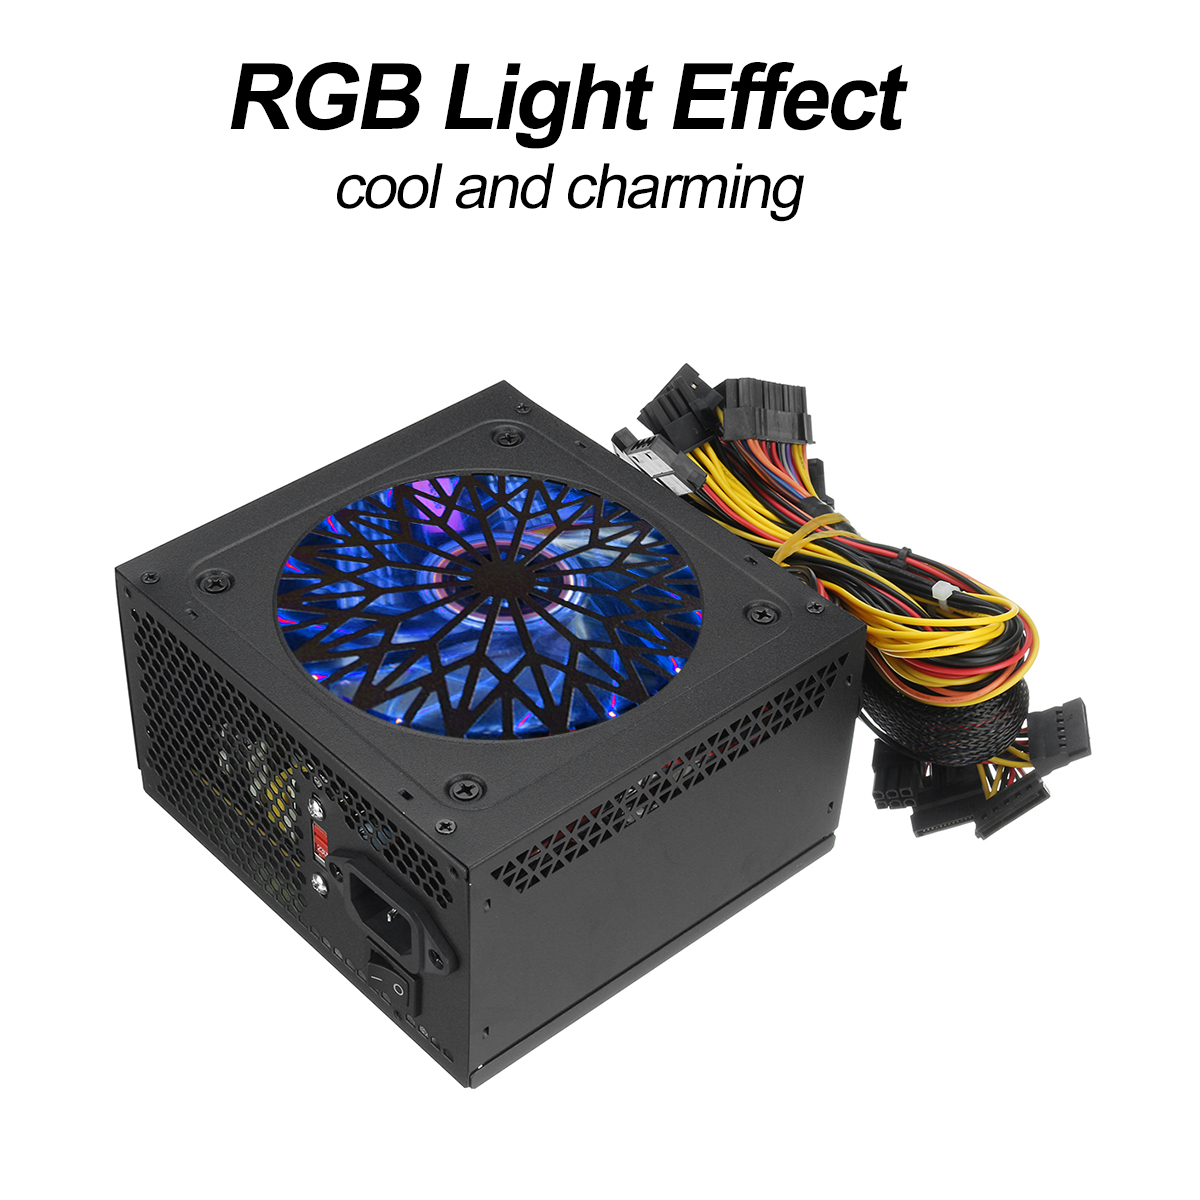 Find 1000W PSU PC Power Supply Unit Passive RGB 12cm Quiet Fan ATX PCI-E SATA PFC for Sale on Gipsybee.com with cryptocurrencies